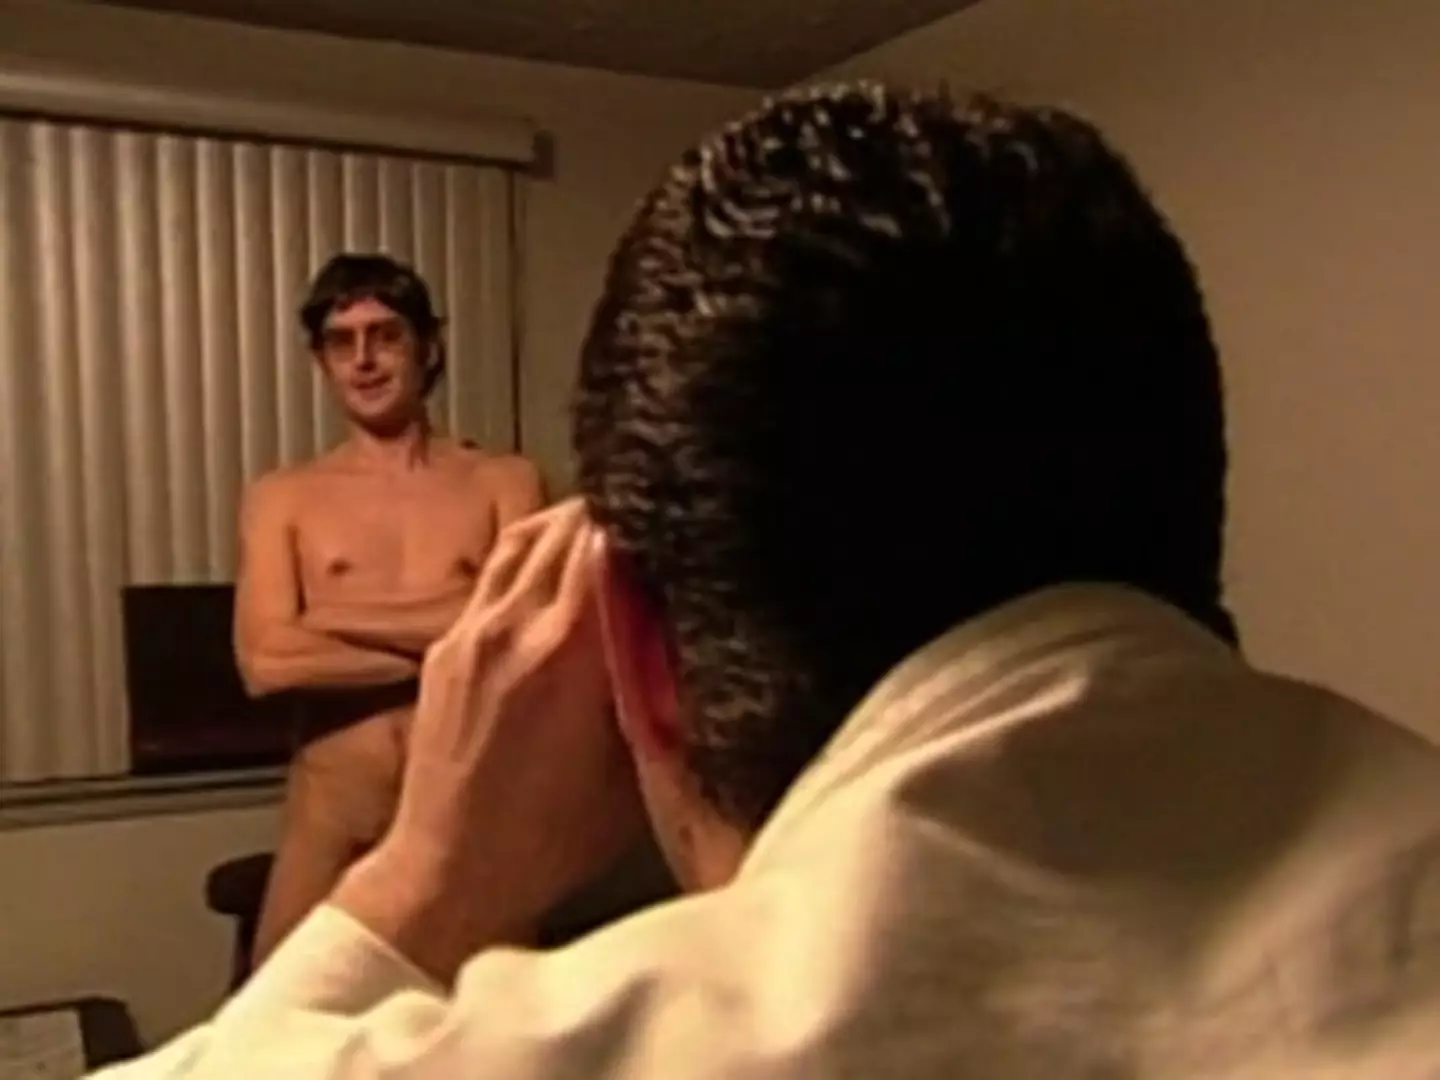 Louis Theroux once bared all for his documentaries (